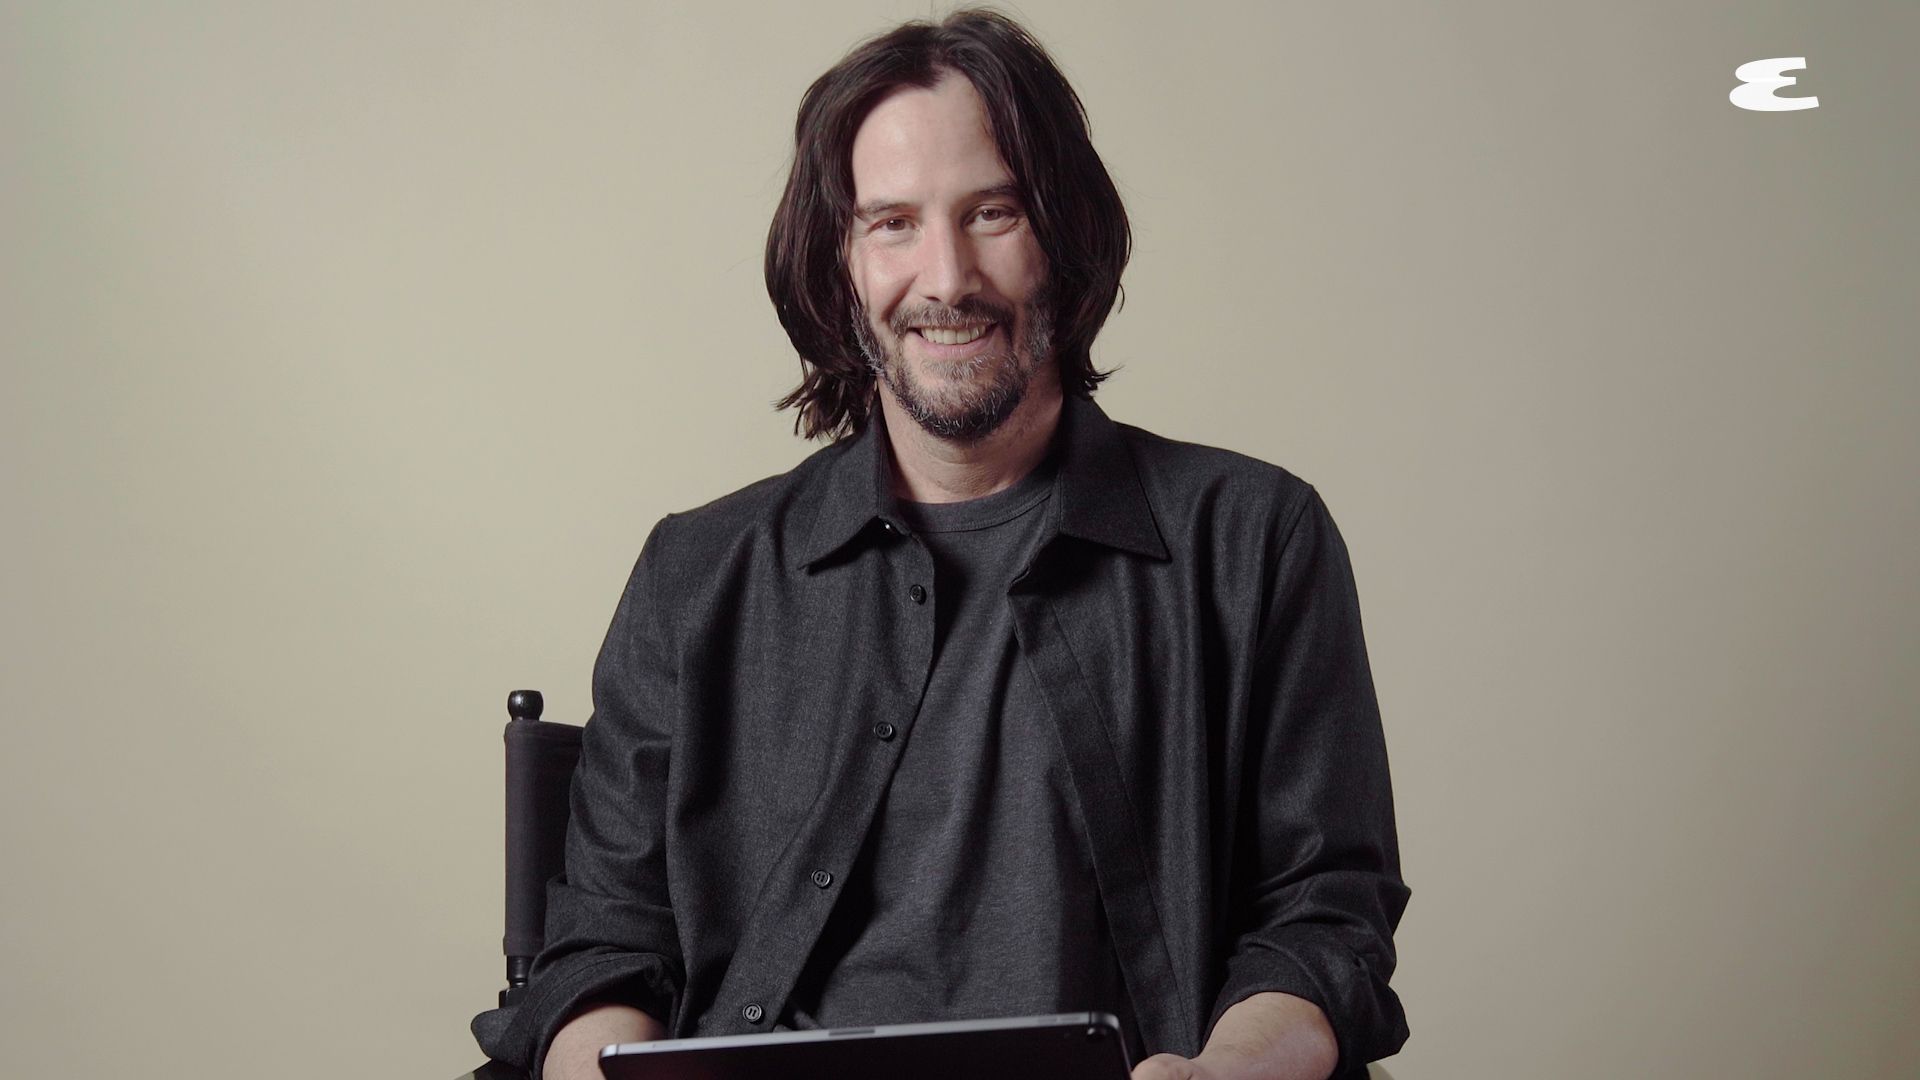 Keanu Reeves Interview - Matrix Star Talks John Wick, Potential MCU Role,  and Marrying Winona Ryder